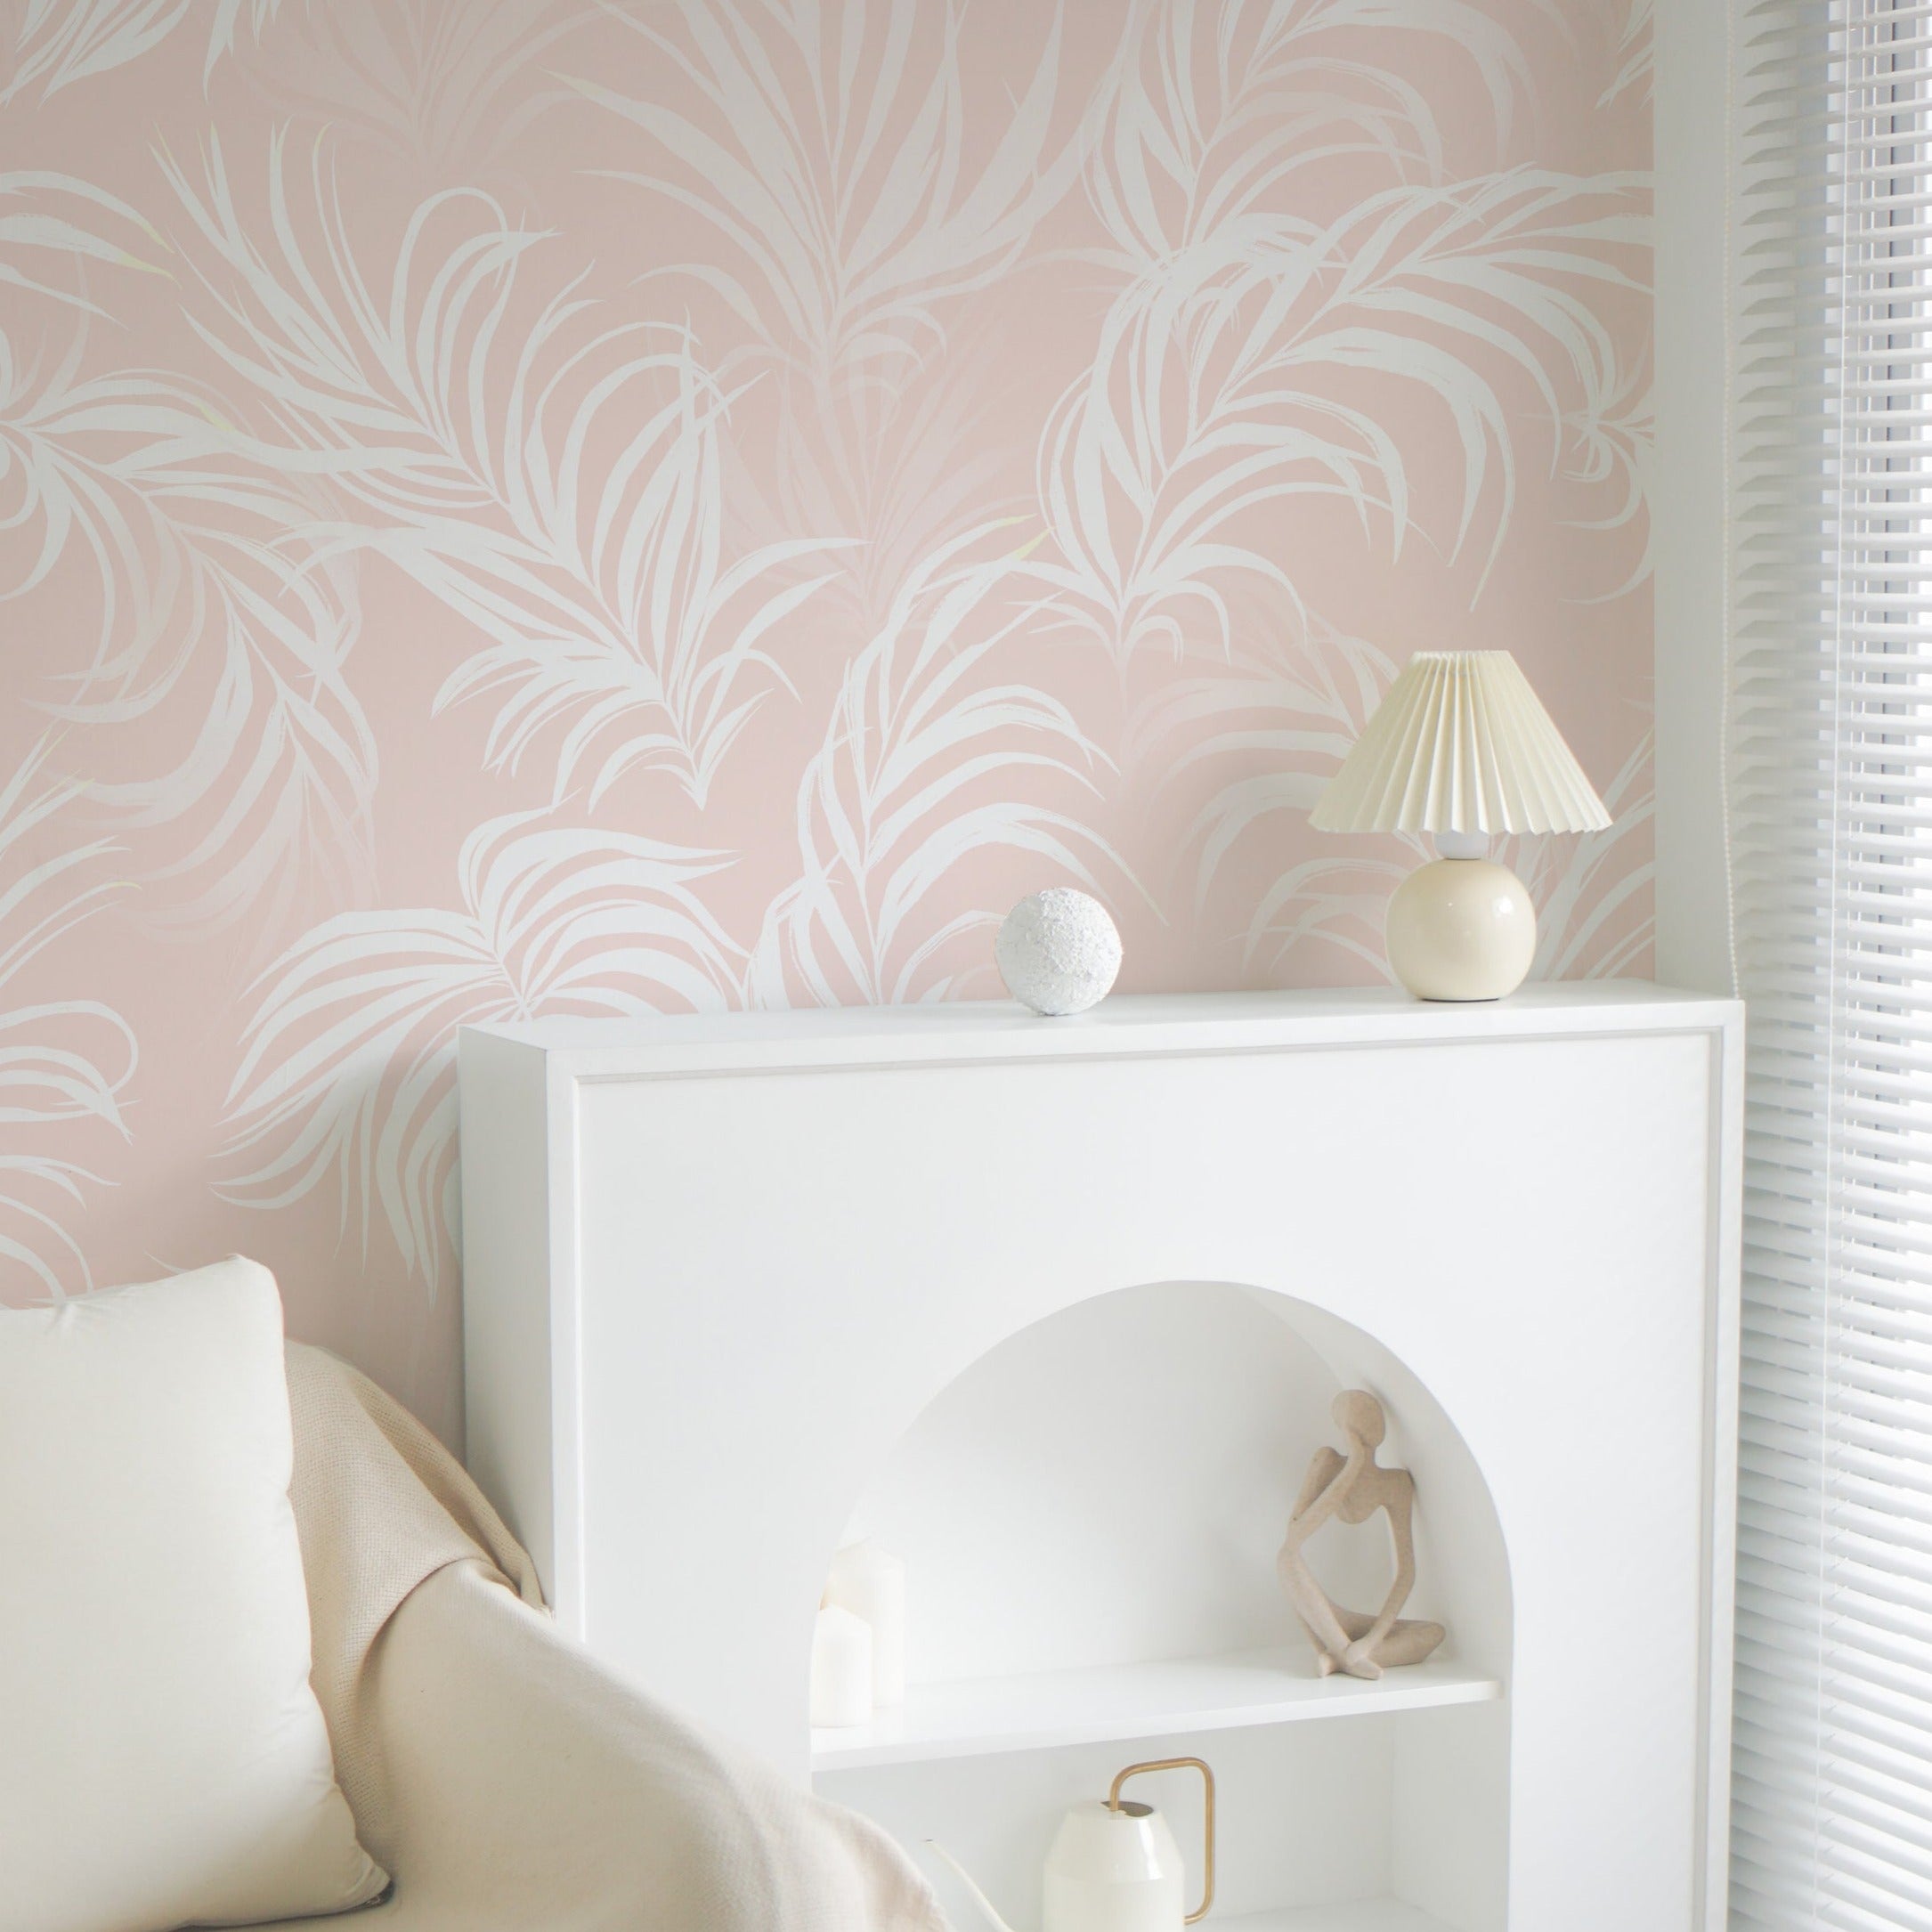 A serene bedroom setting adorned with "Tropical Champagne Wallpaper," which frames a white sideboard and minimalist decor. The wallpaper's soft hues and tropical designs create a calm, relaxing environment that is both stylish and comforting.